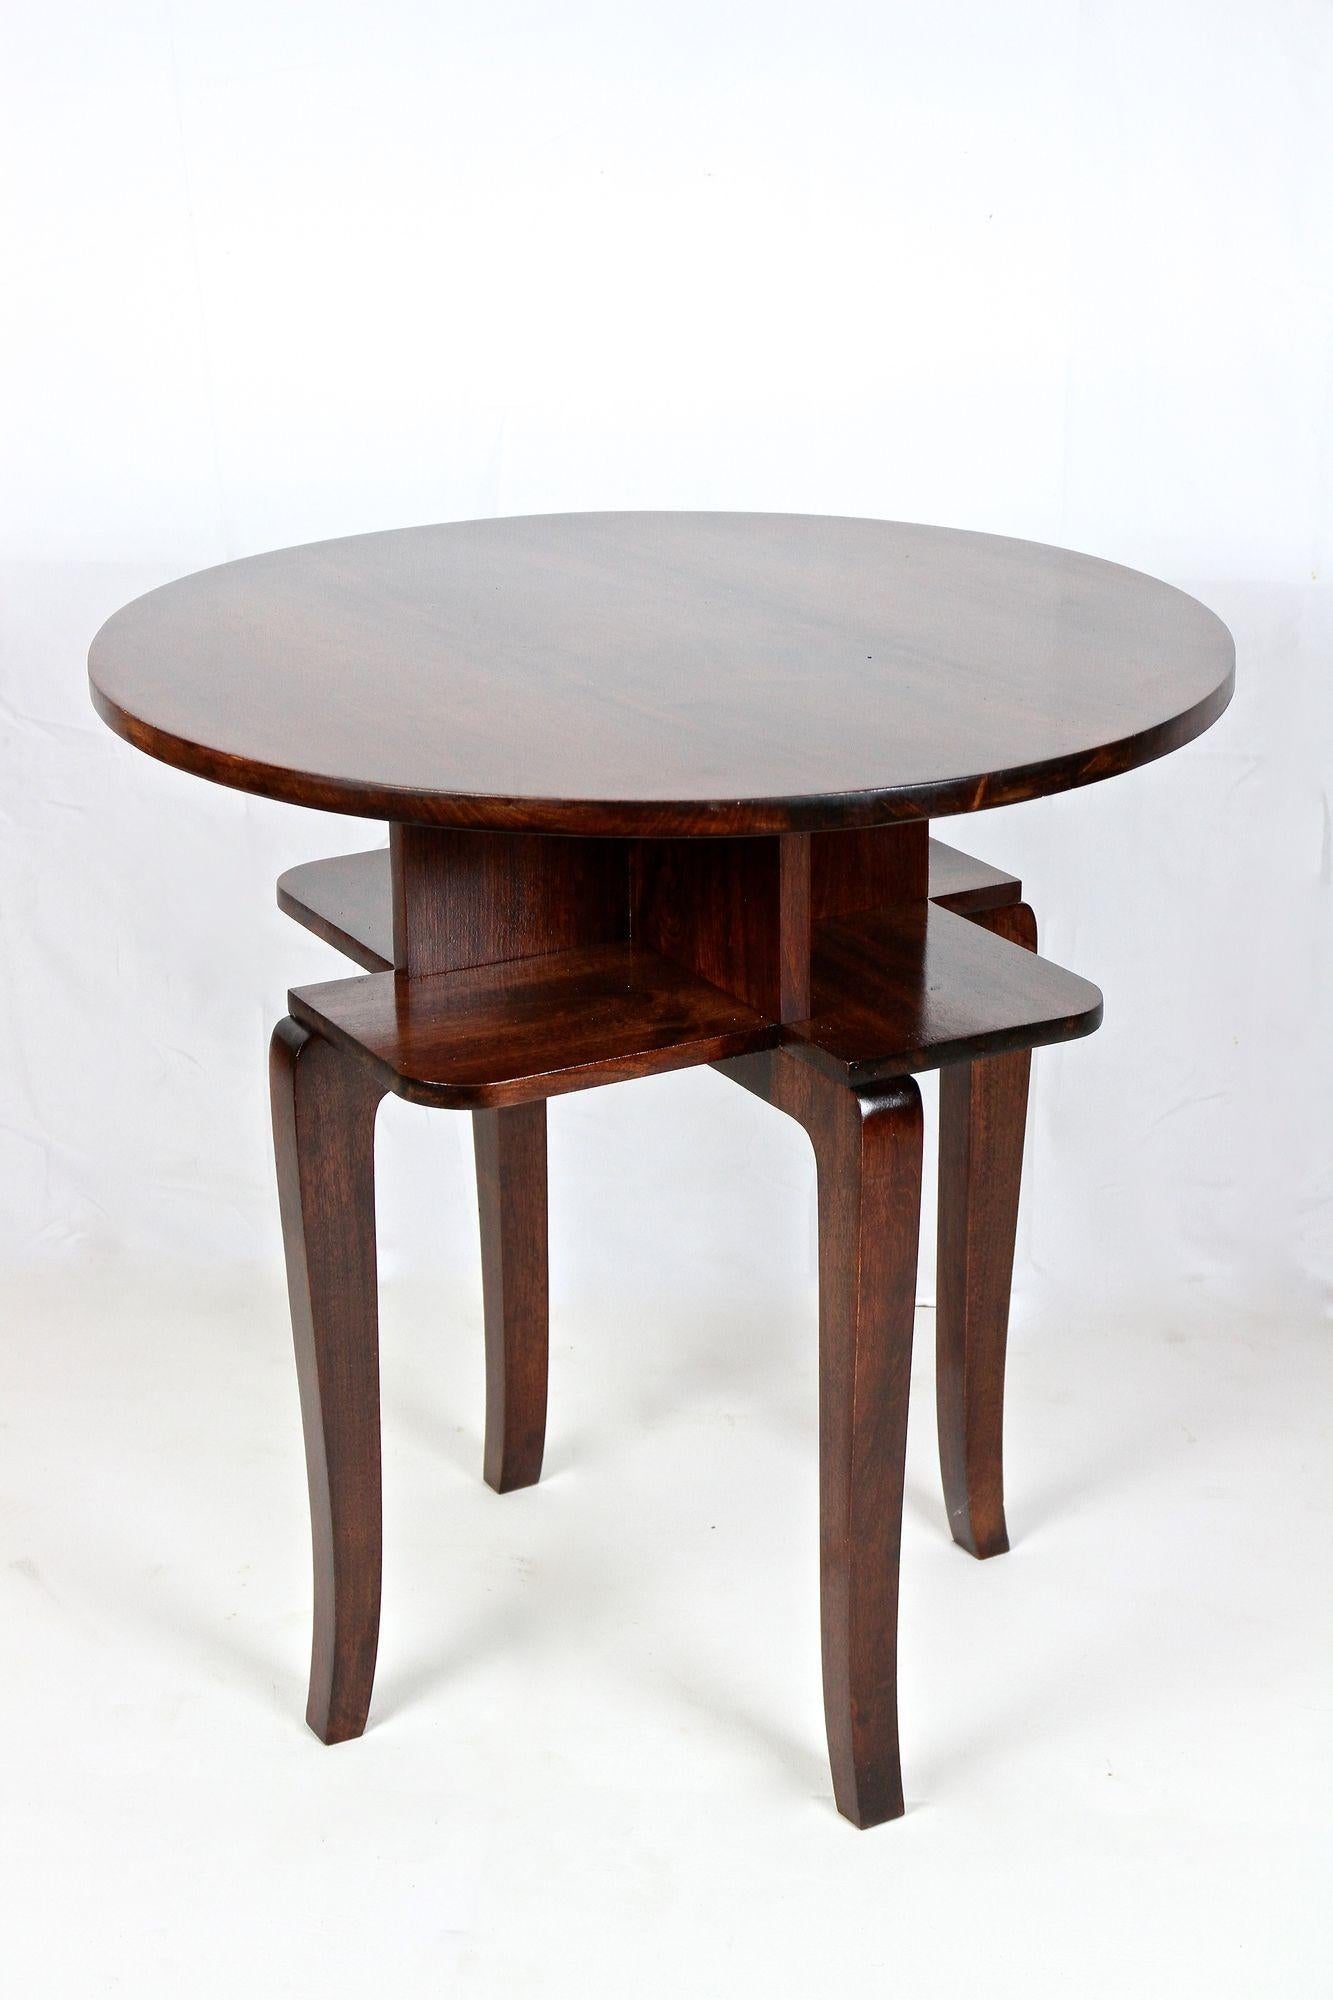 Extraordinary shaped round Art Deco design side table from Austria around 1920. Elaborately crafted out of fine bentwood (=beech wood) this beautiful round side table shows elegantly, slightly curved feet and a great looking surface which has been